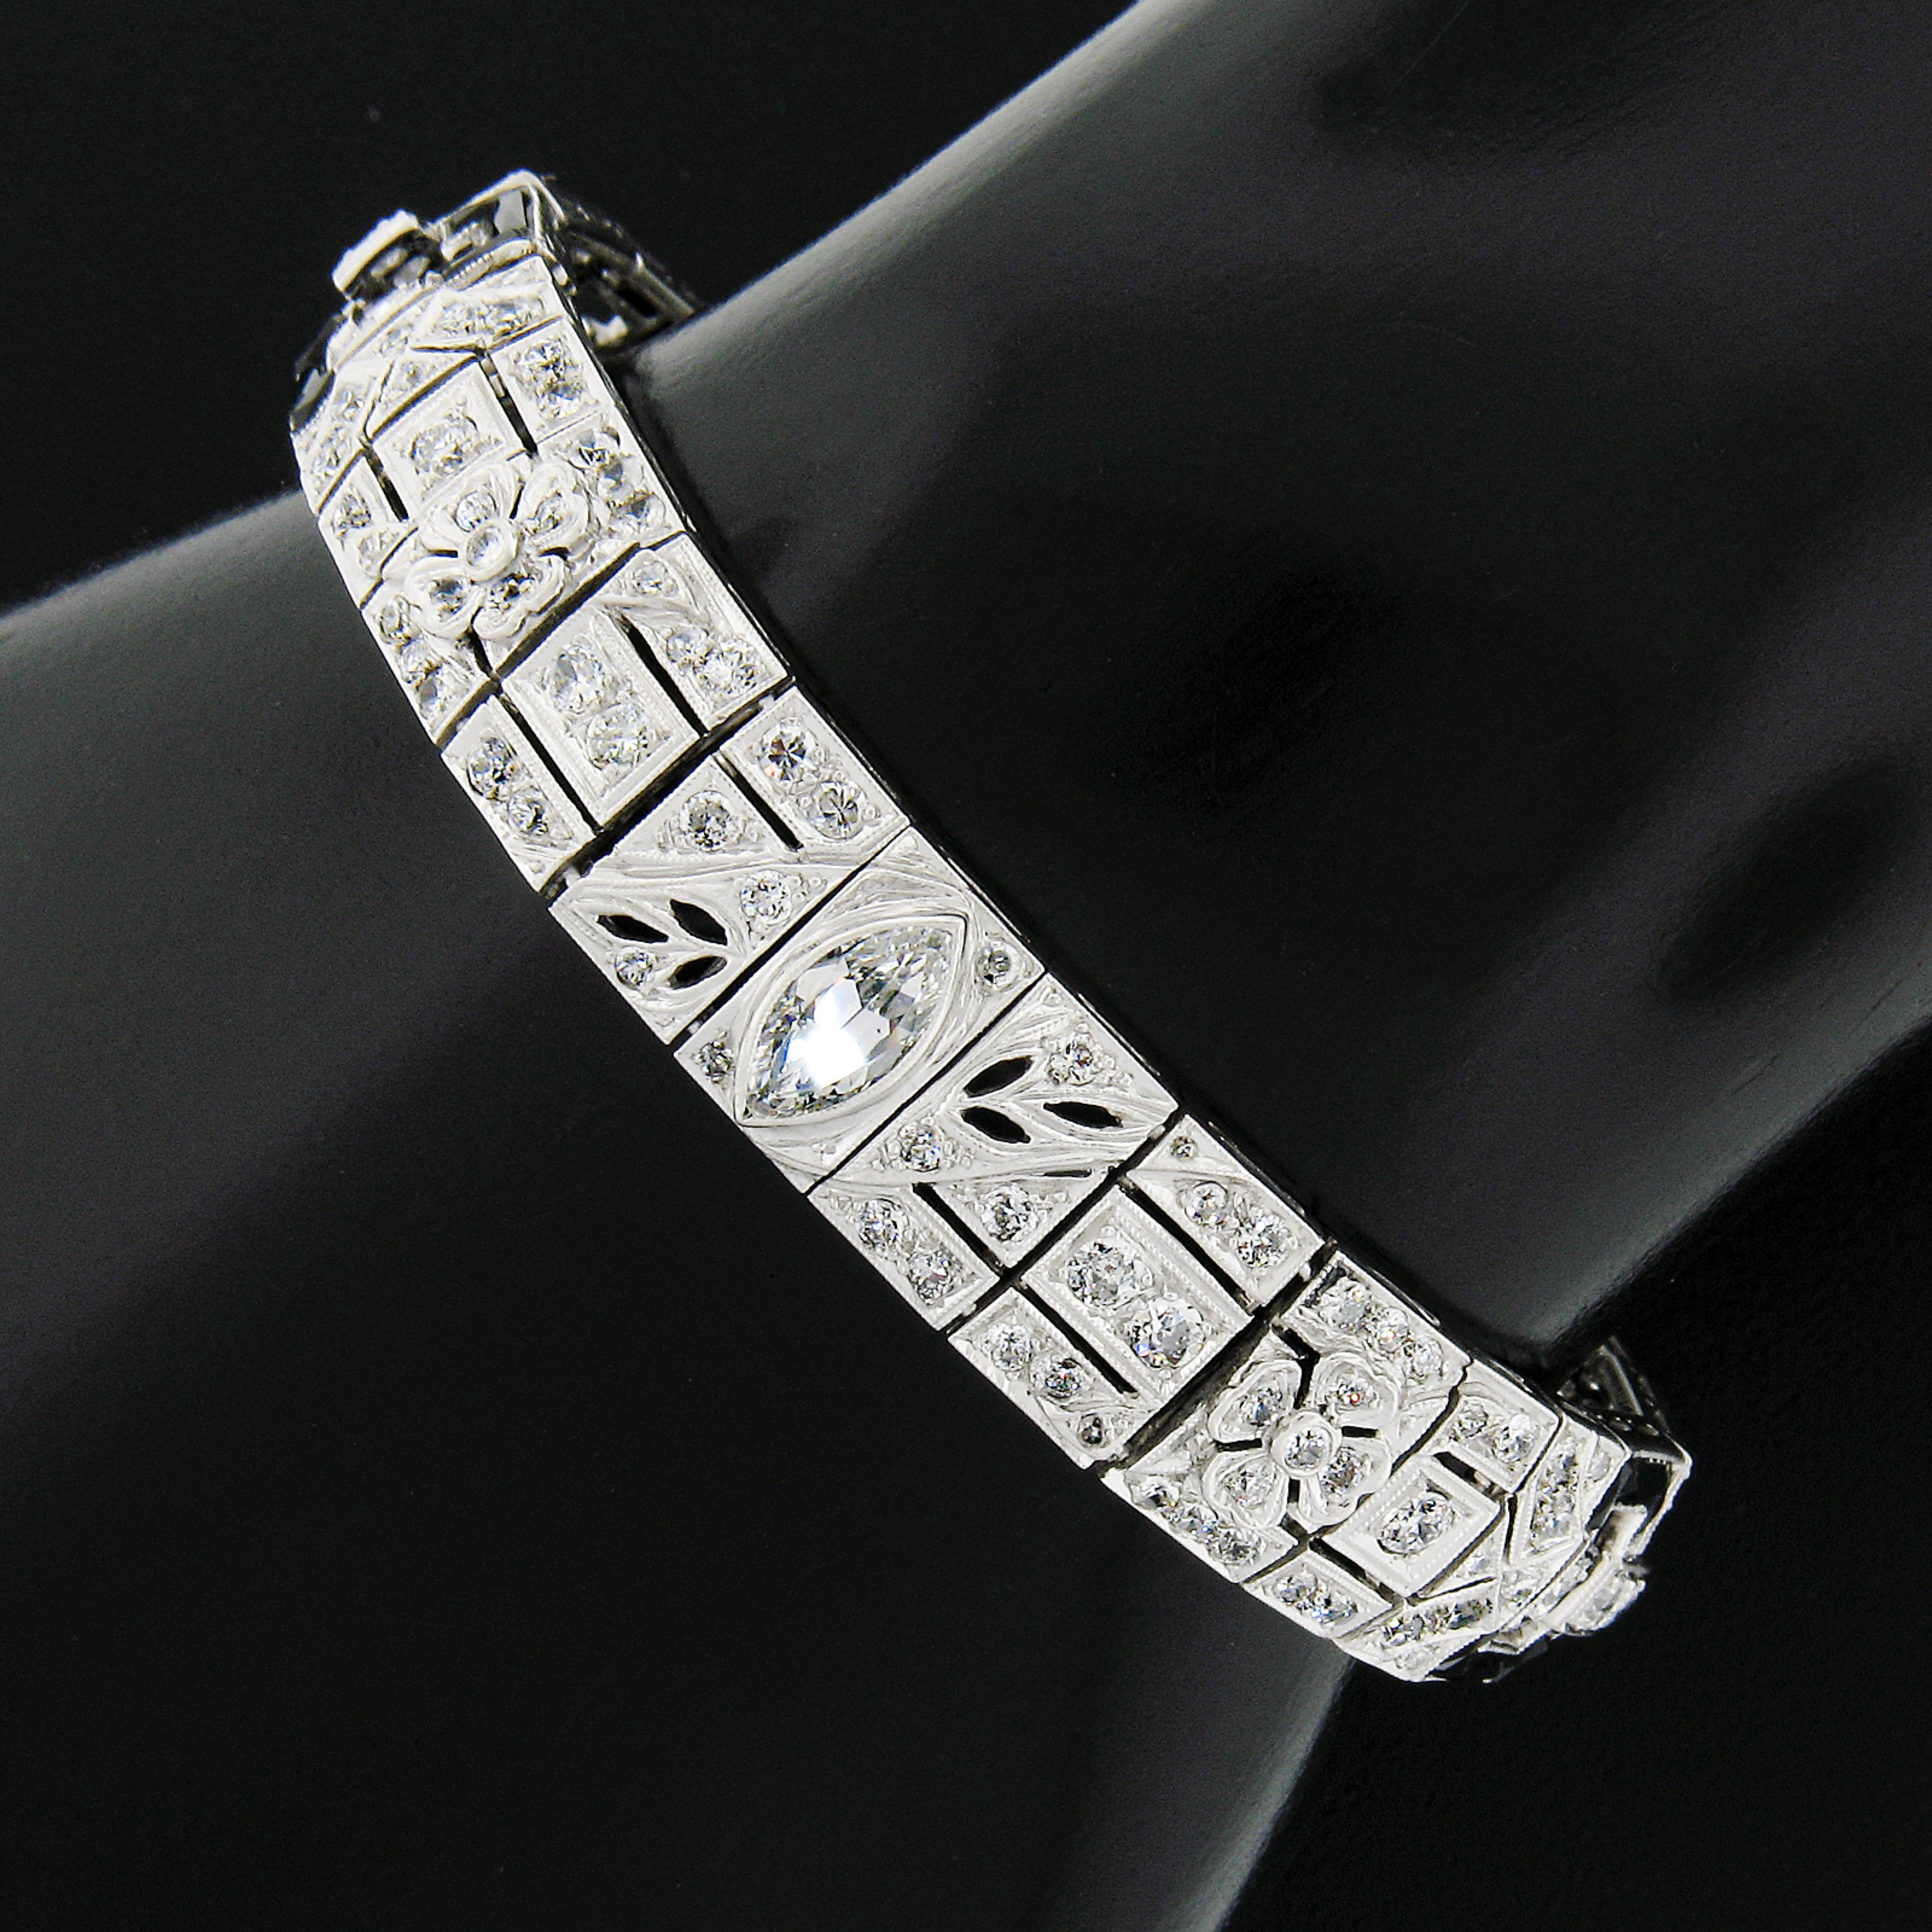 Here we have an absolutely incredible, ALL ORIGINAL, antique art deco period bracelet crafted in solid platinum and features rectangular and square links that are fully and elegantly encrusted with old cut diamonds and French baguette cut black onyx